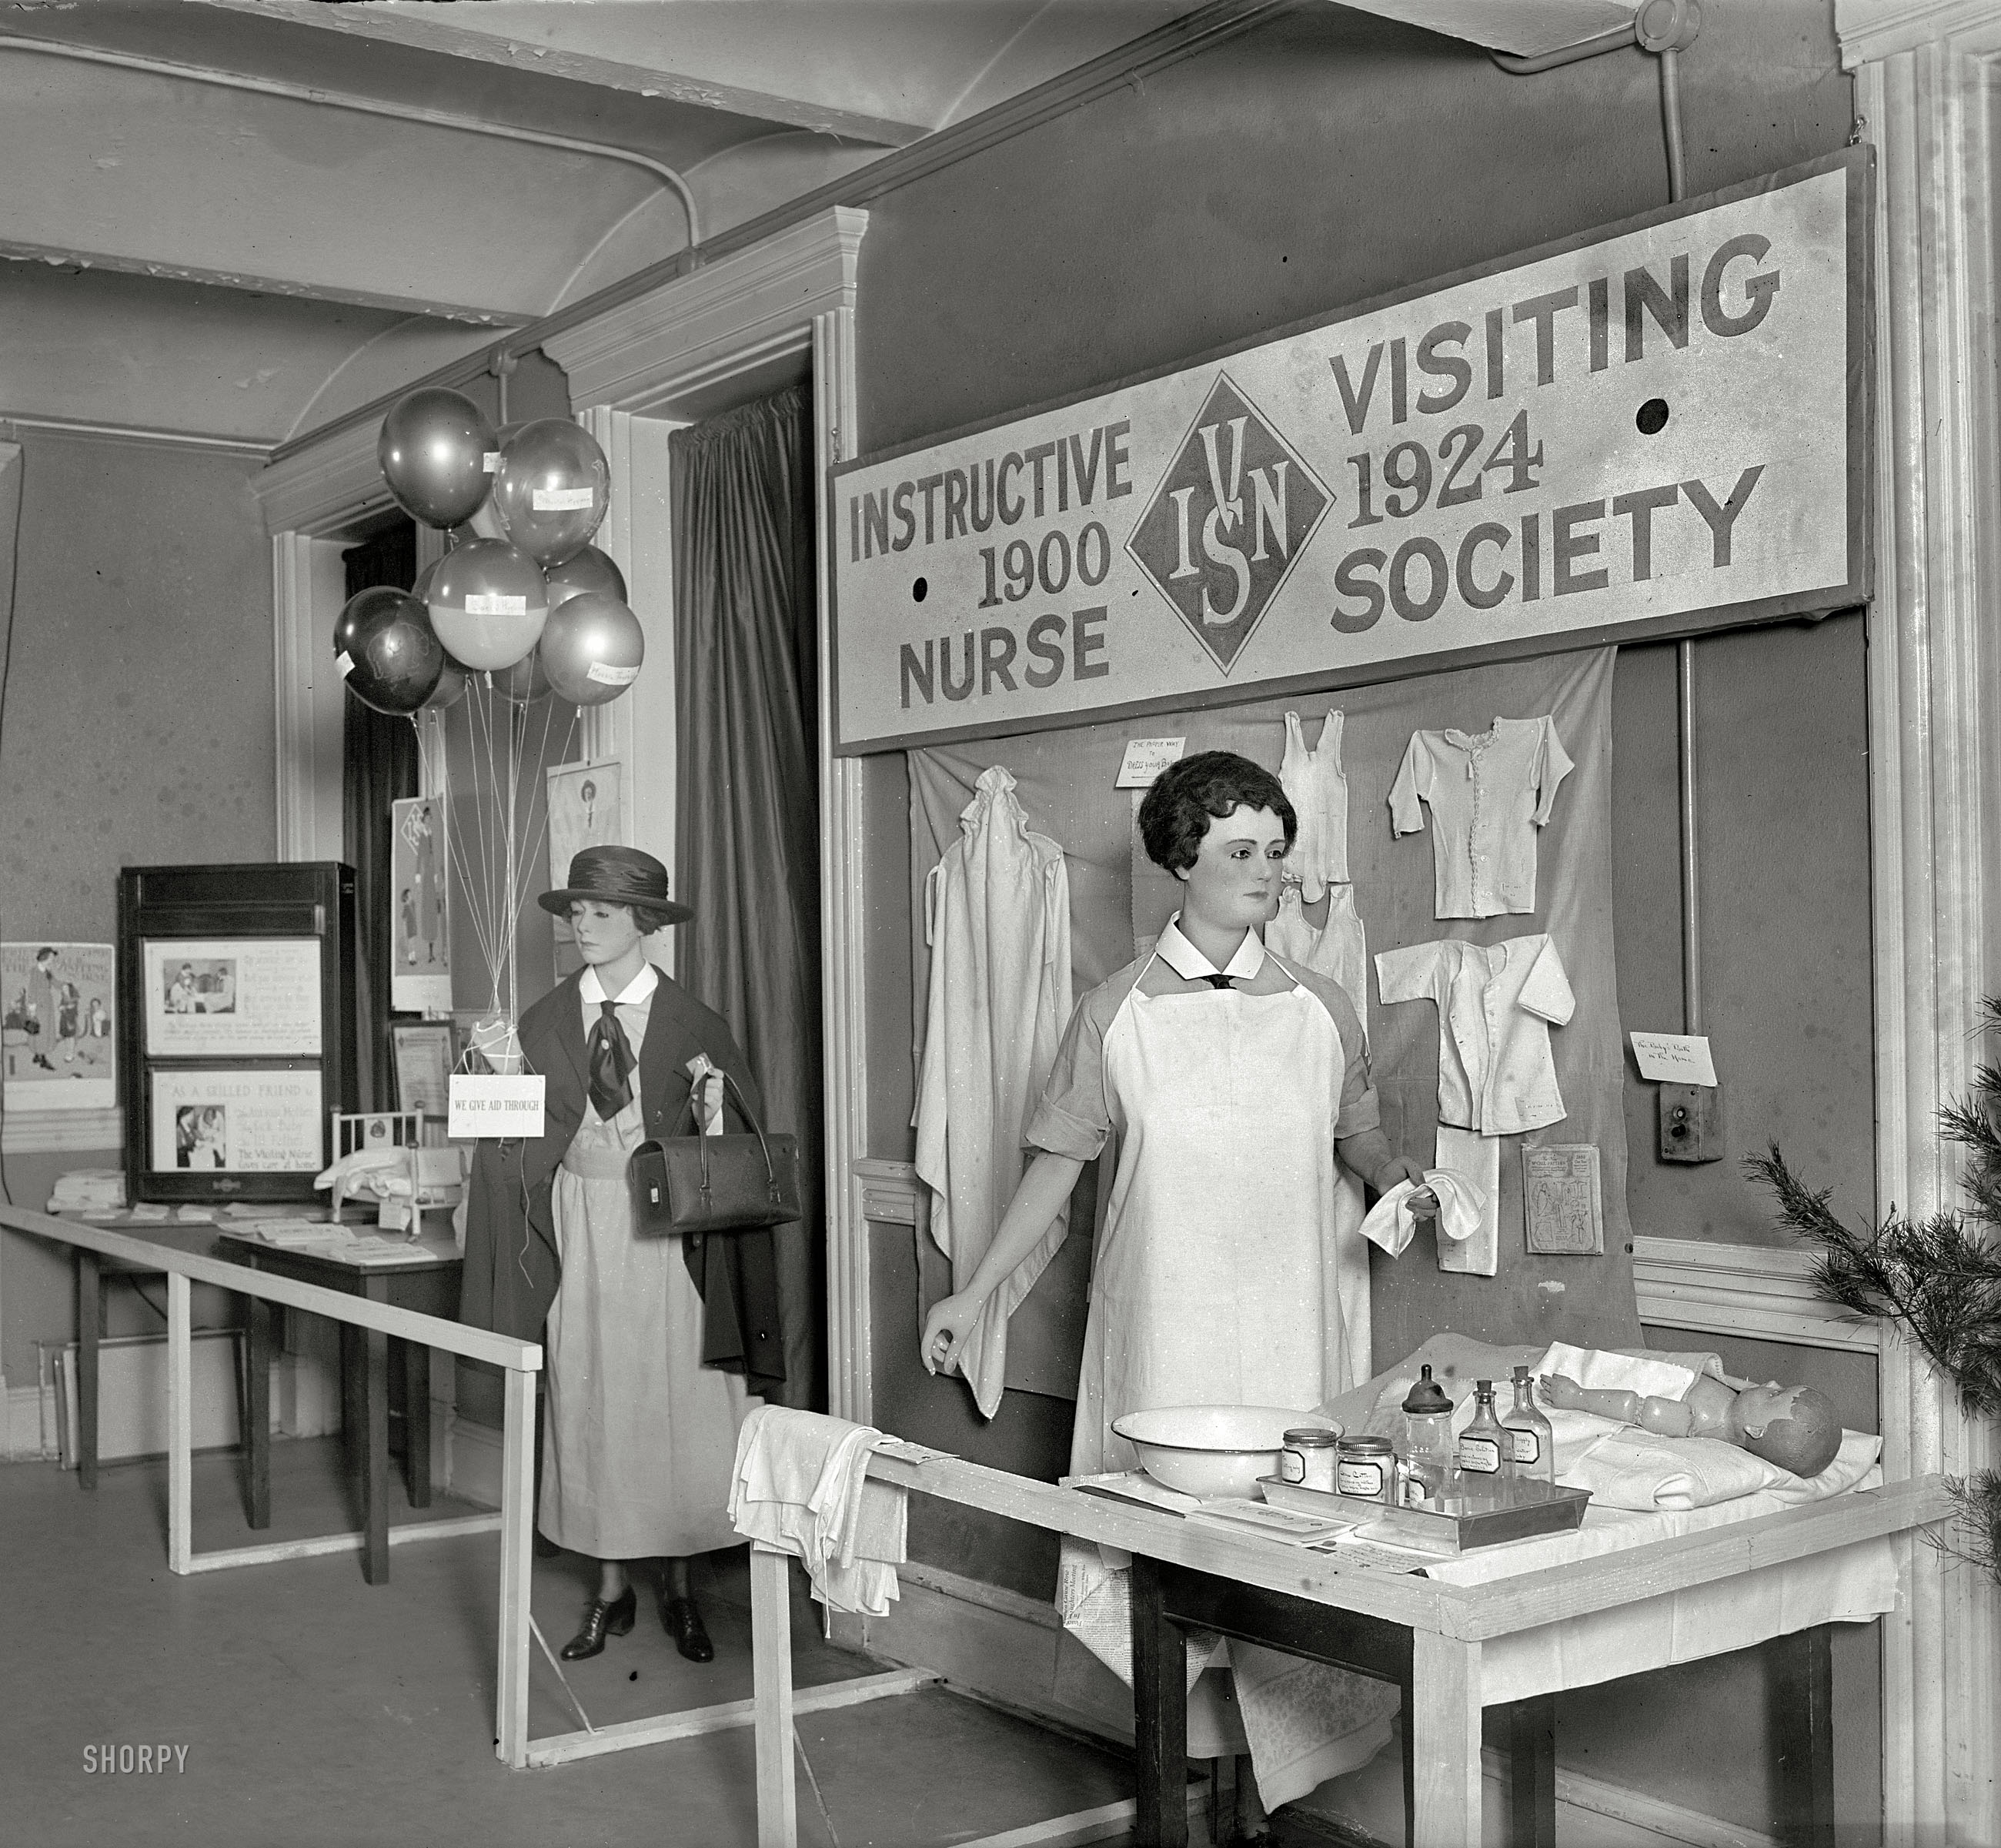 April 1924. Washington, D.C. "Health Week. Instructive Visiting Nurse Society exhibit." Tips on "The Proper Way to Dress Your Baby," and "The Baby's Bath in the Home." National Photo Company Collection glass negative. View full size.